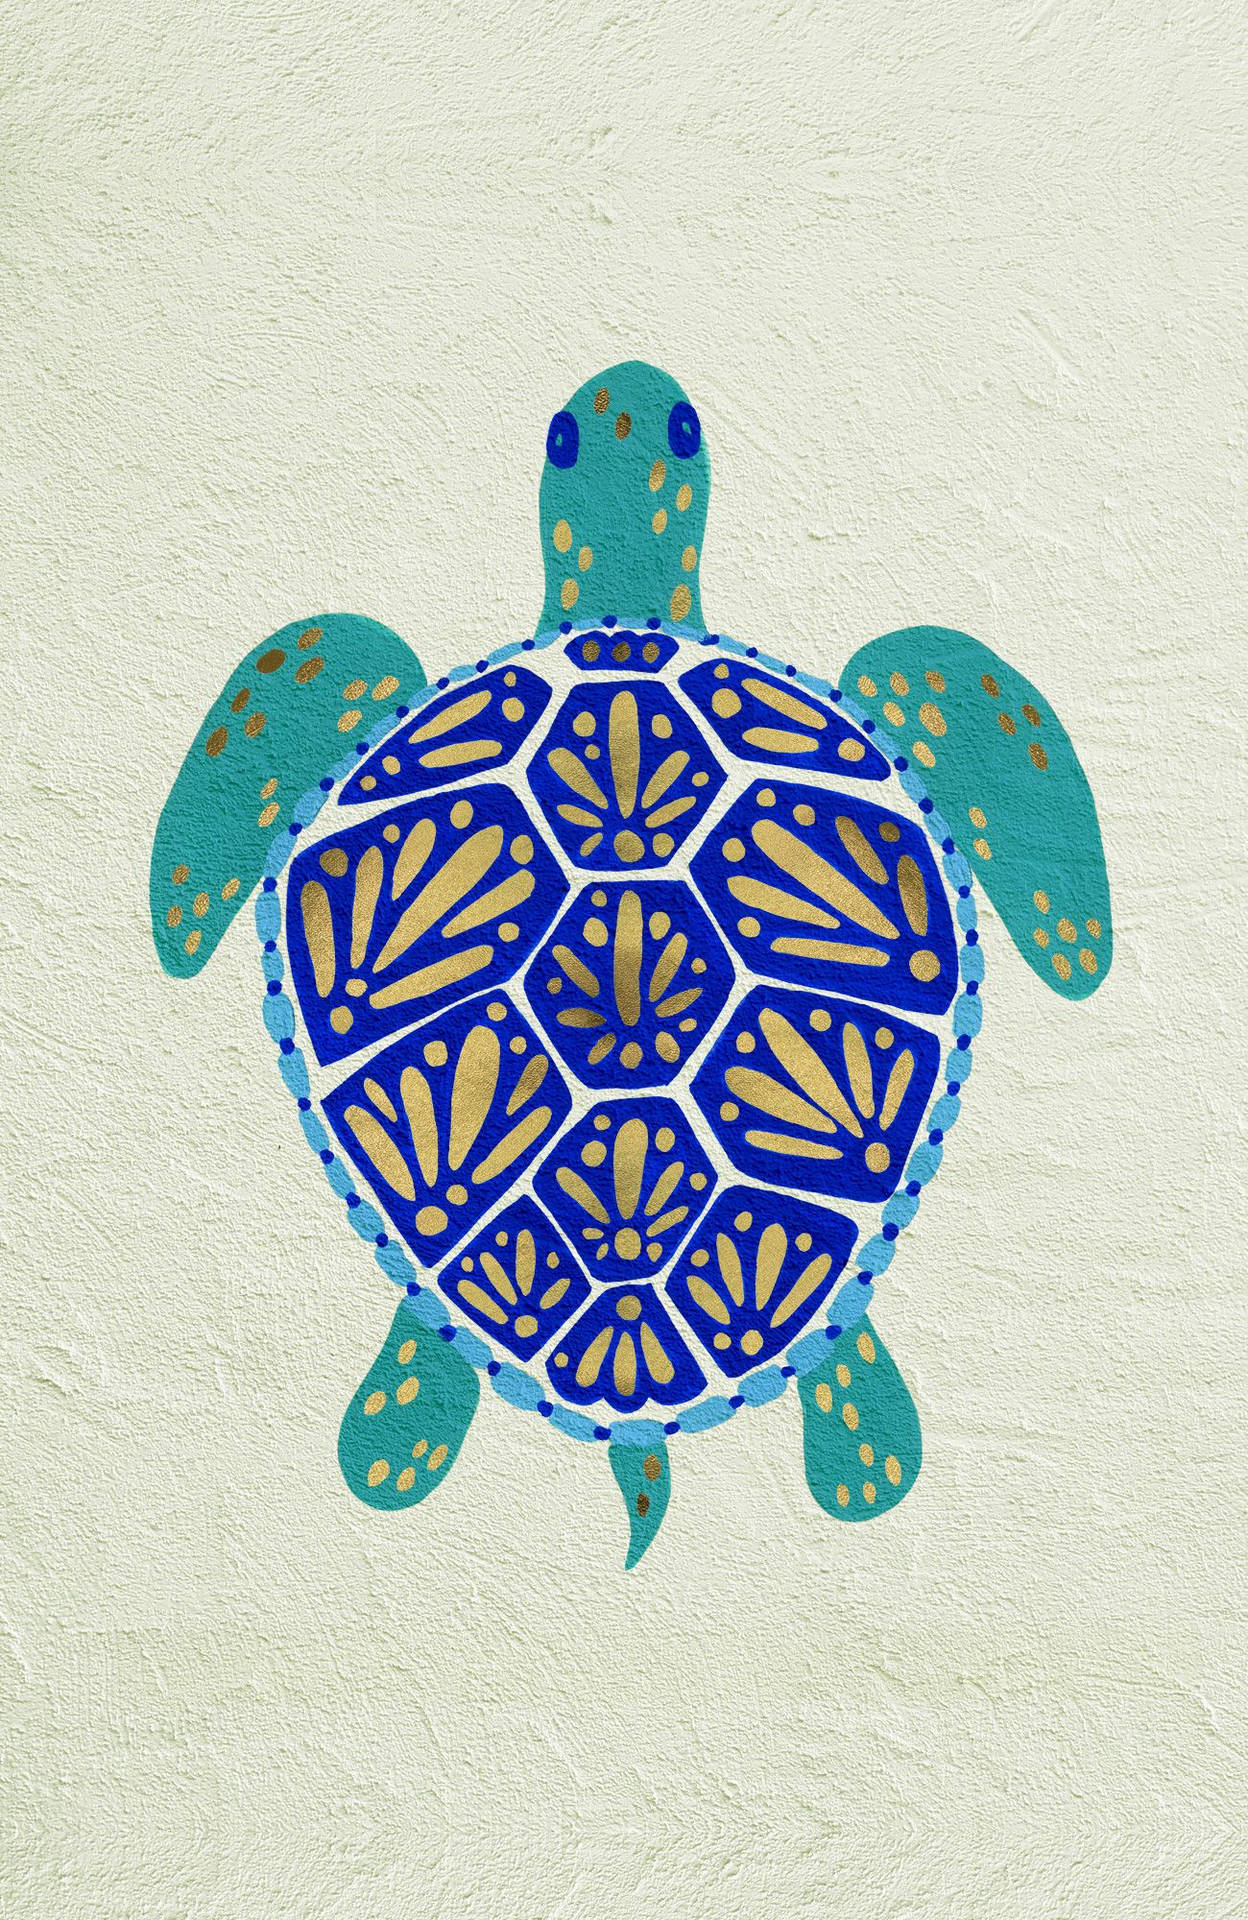 Cool Turtle Painting Wallpaper